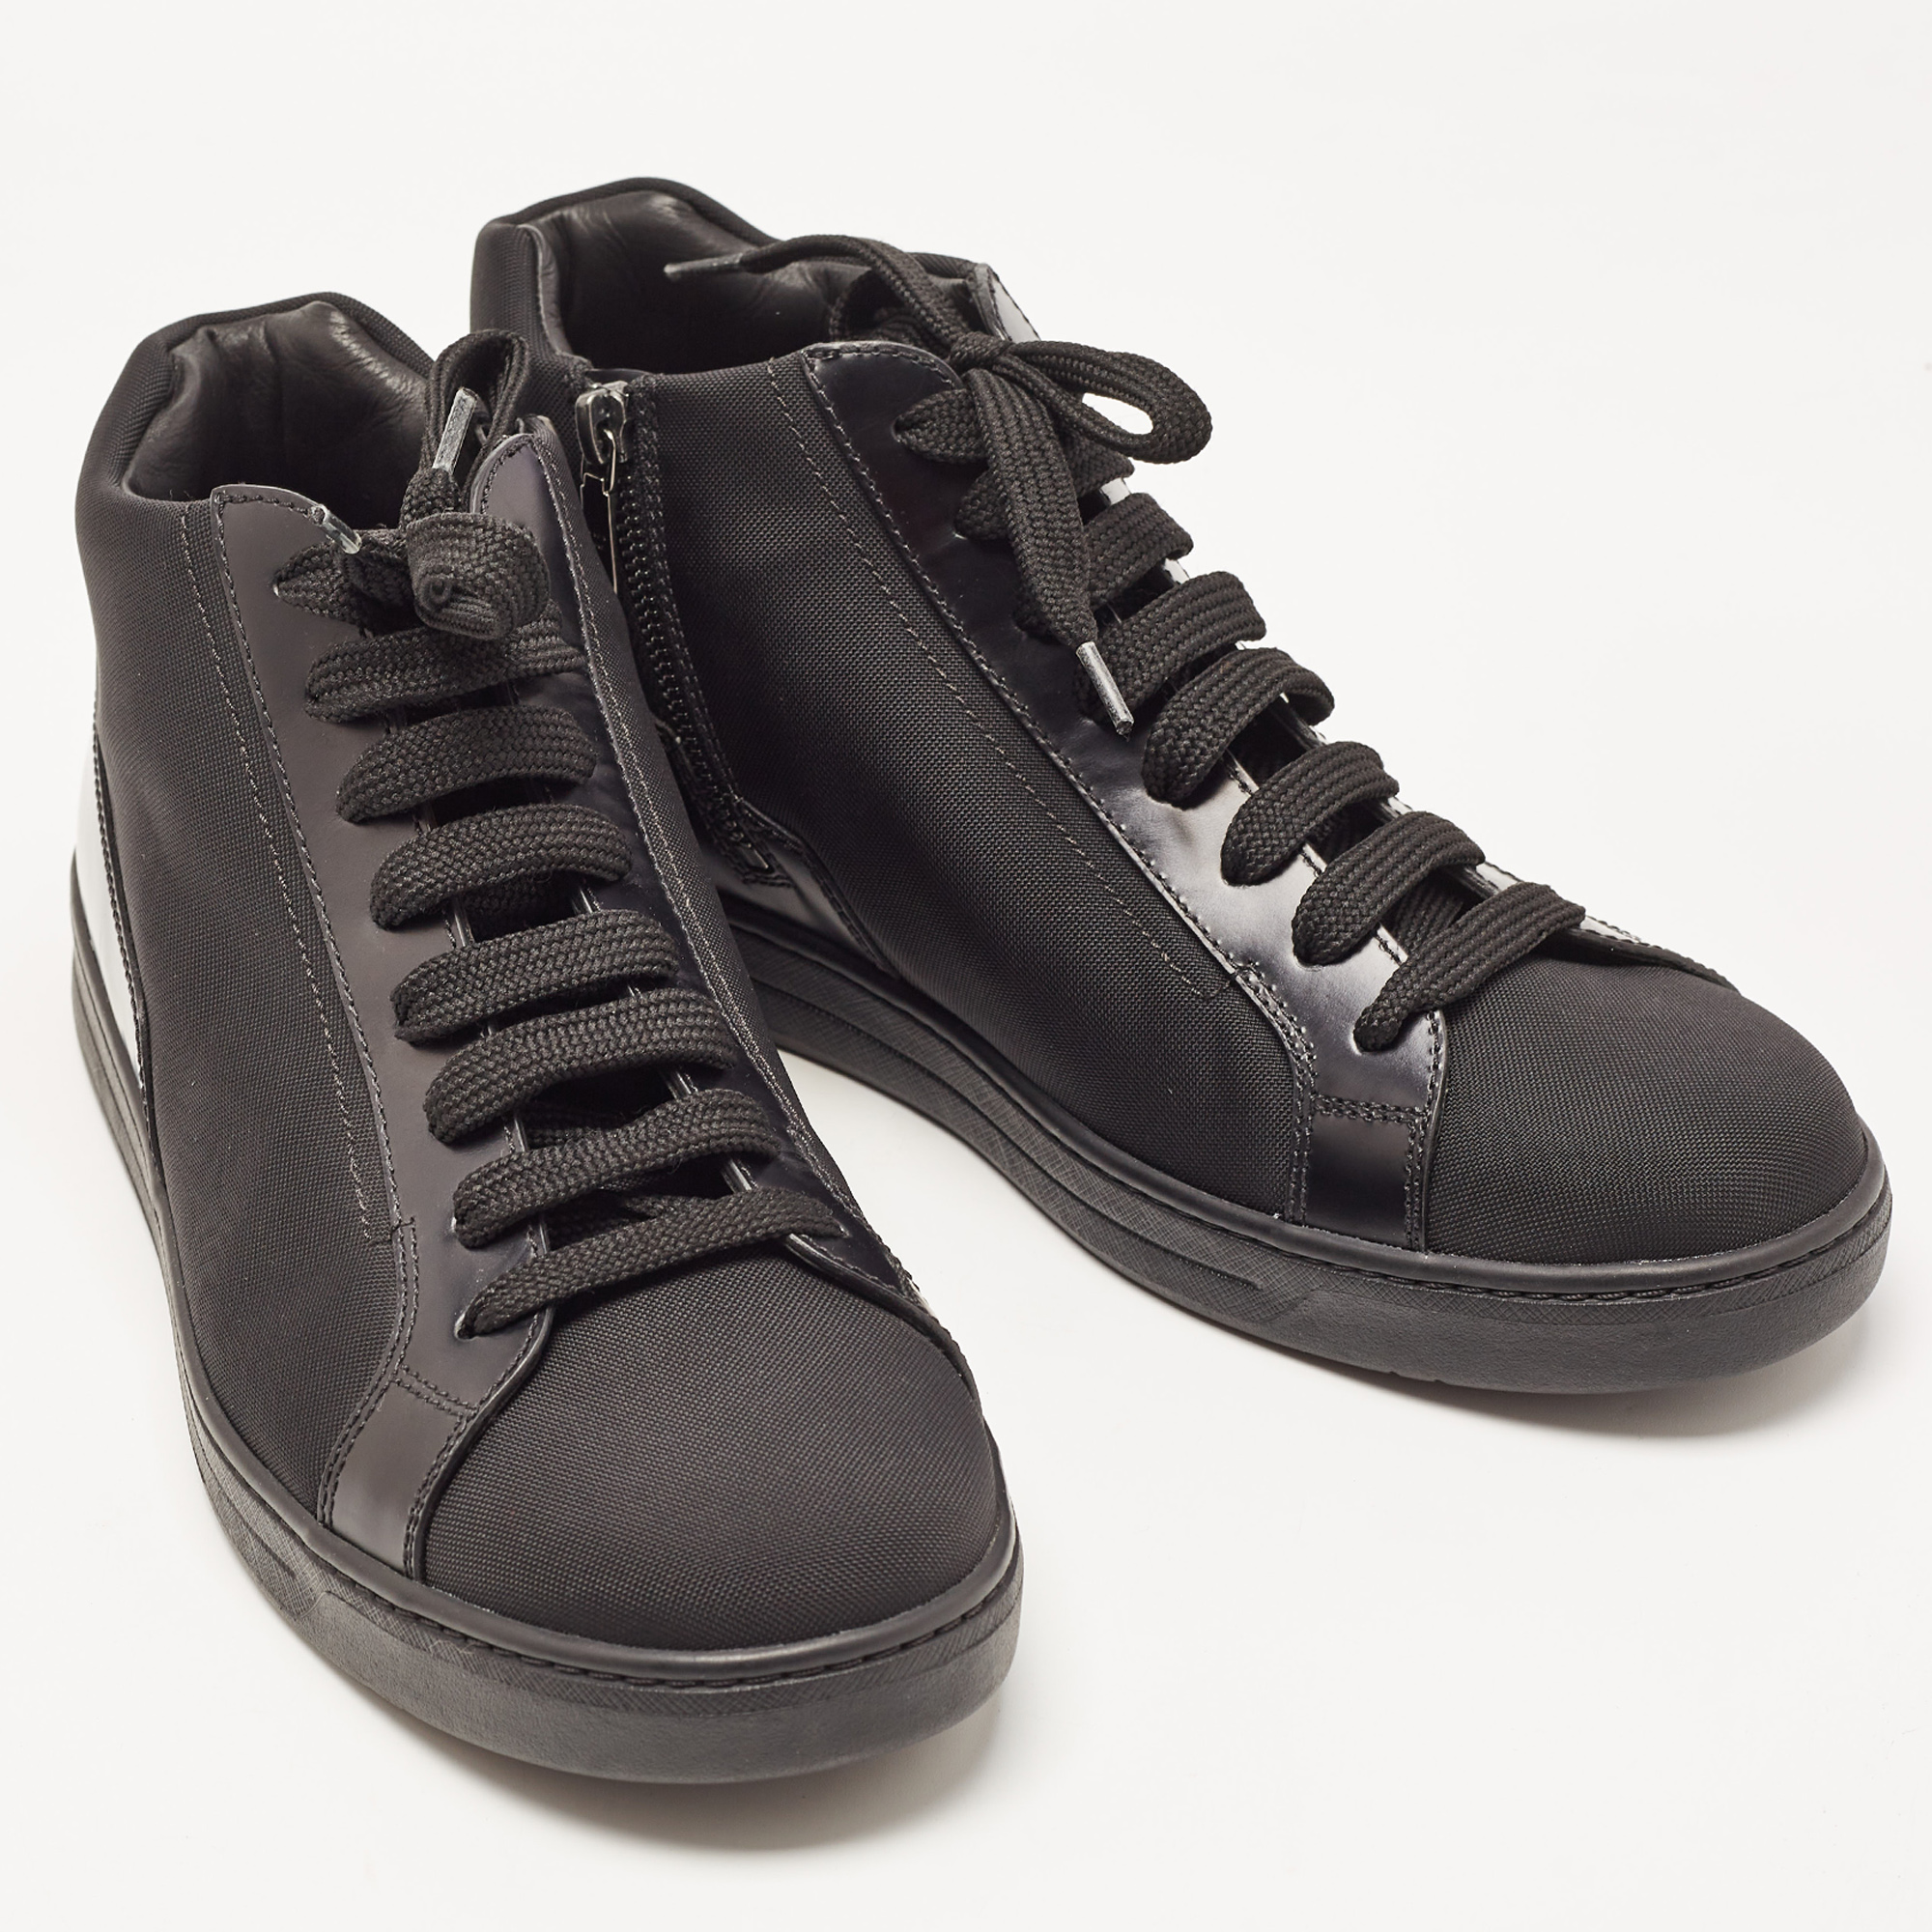 Prada Sport Black Nylon And Leather Mid Top Sneakers Size 43